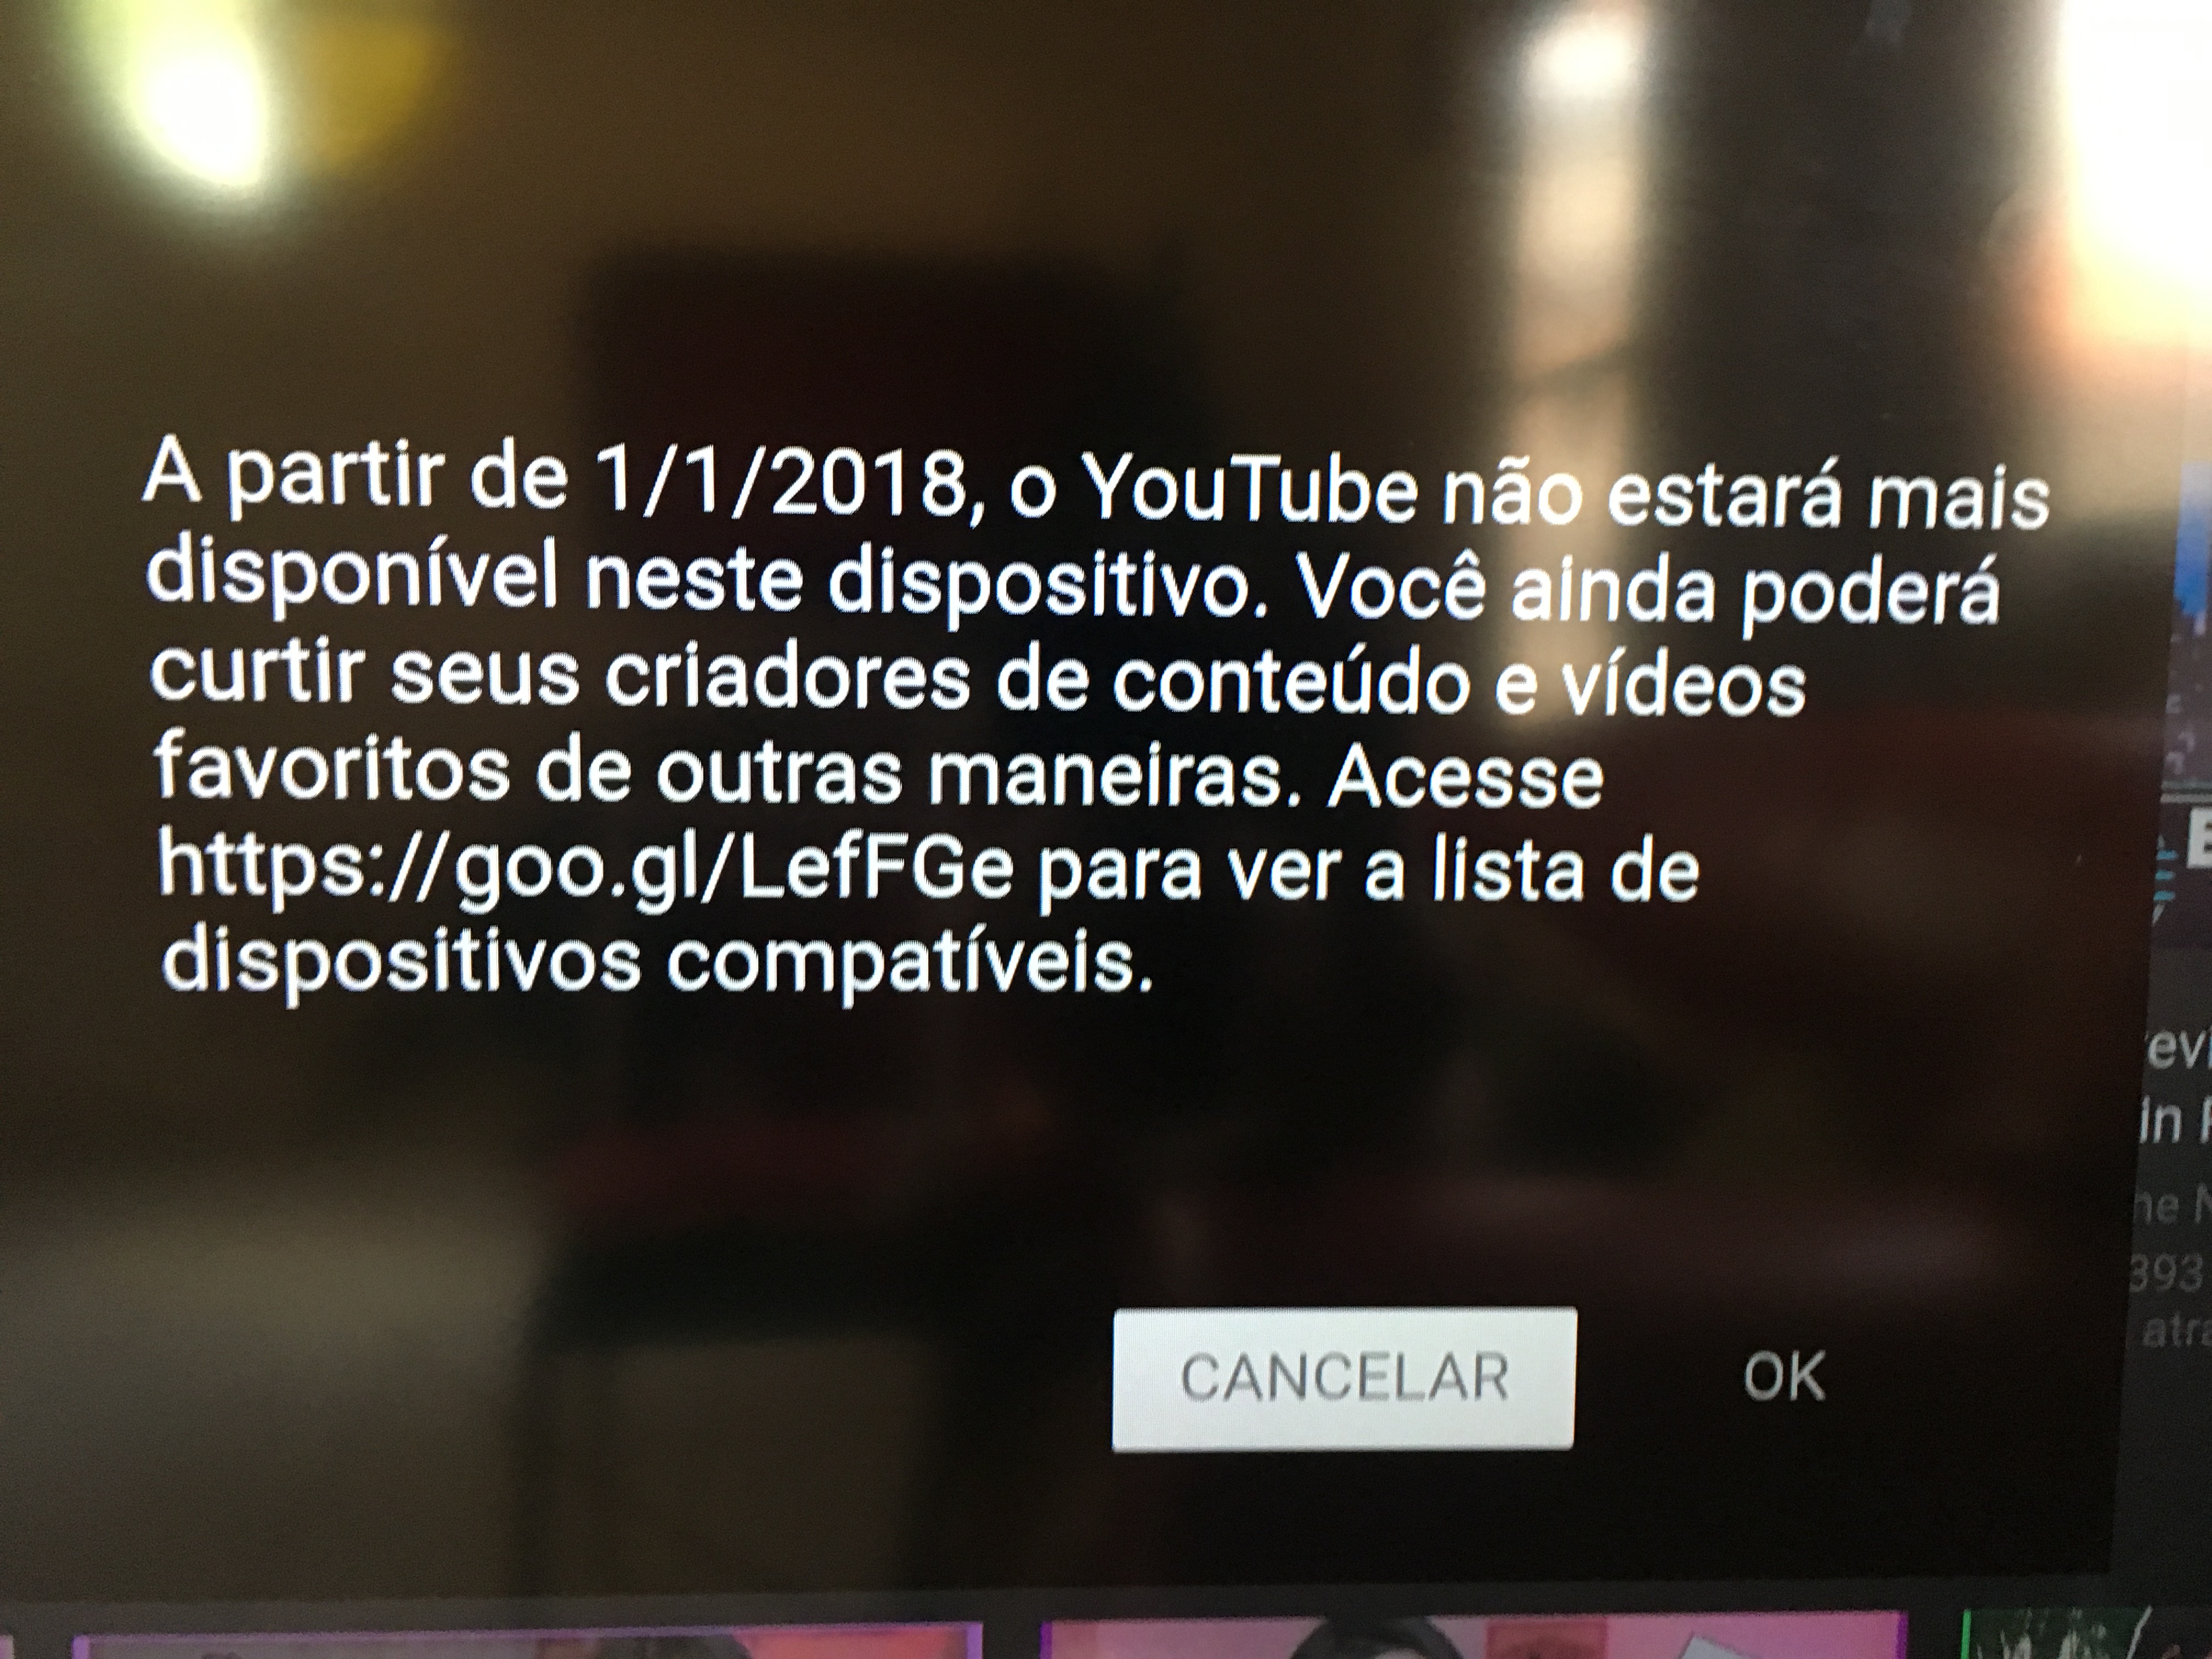 YouTube warning on Fire TV Stick